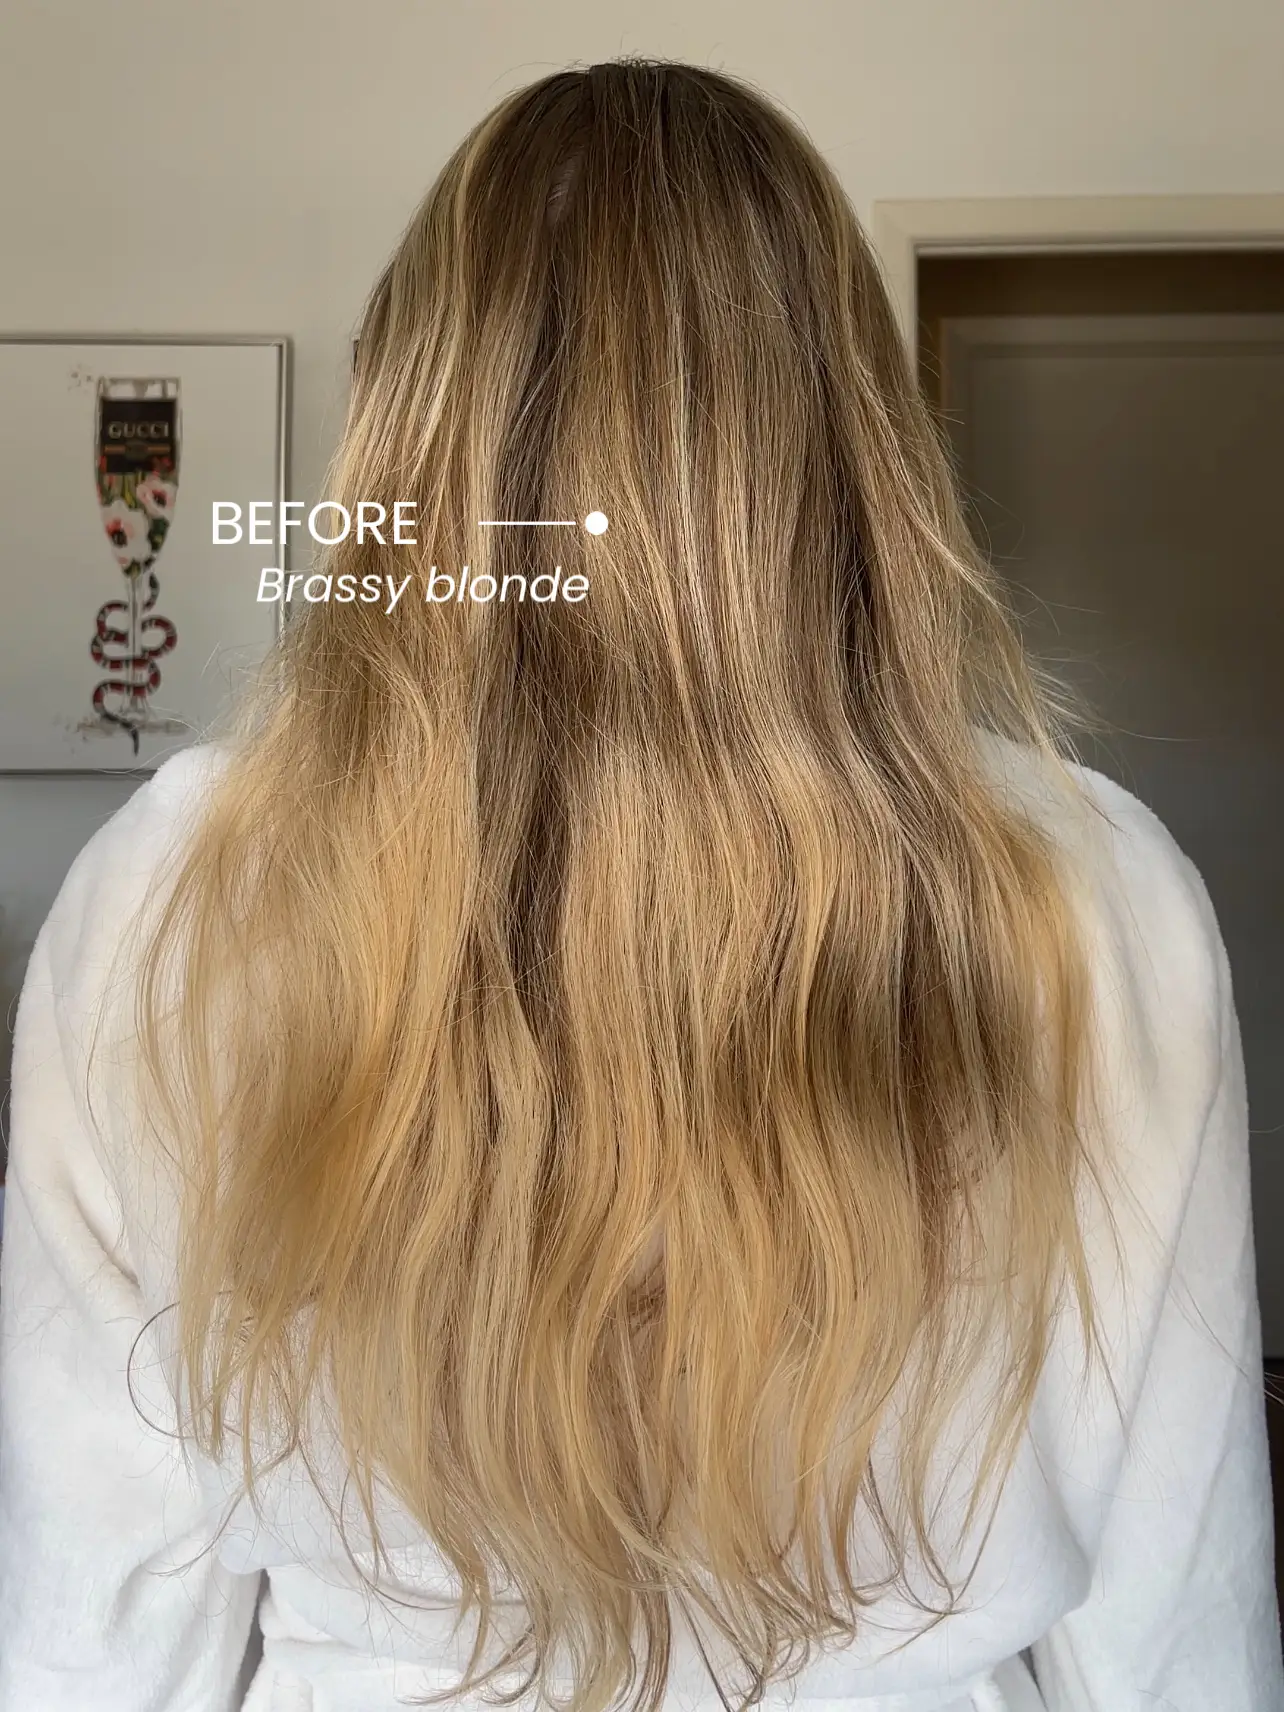 ELIMINATE BRASSY HAIR 🤍, Gallery posted by brianabappert